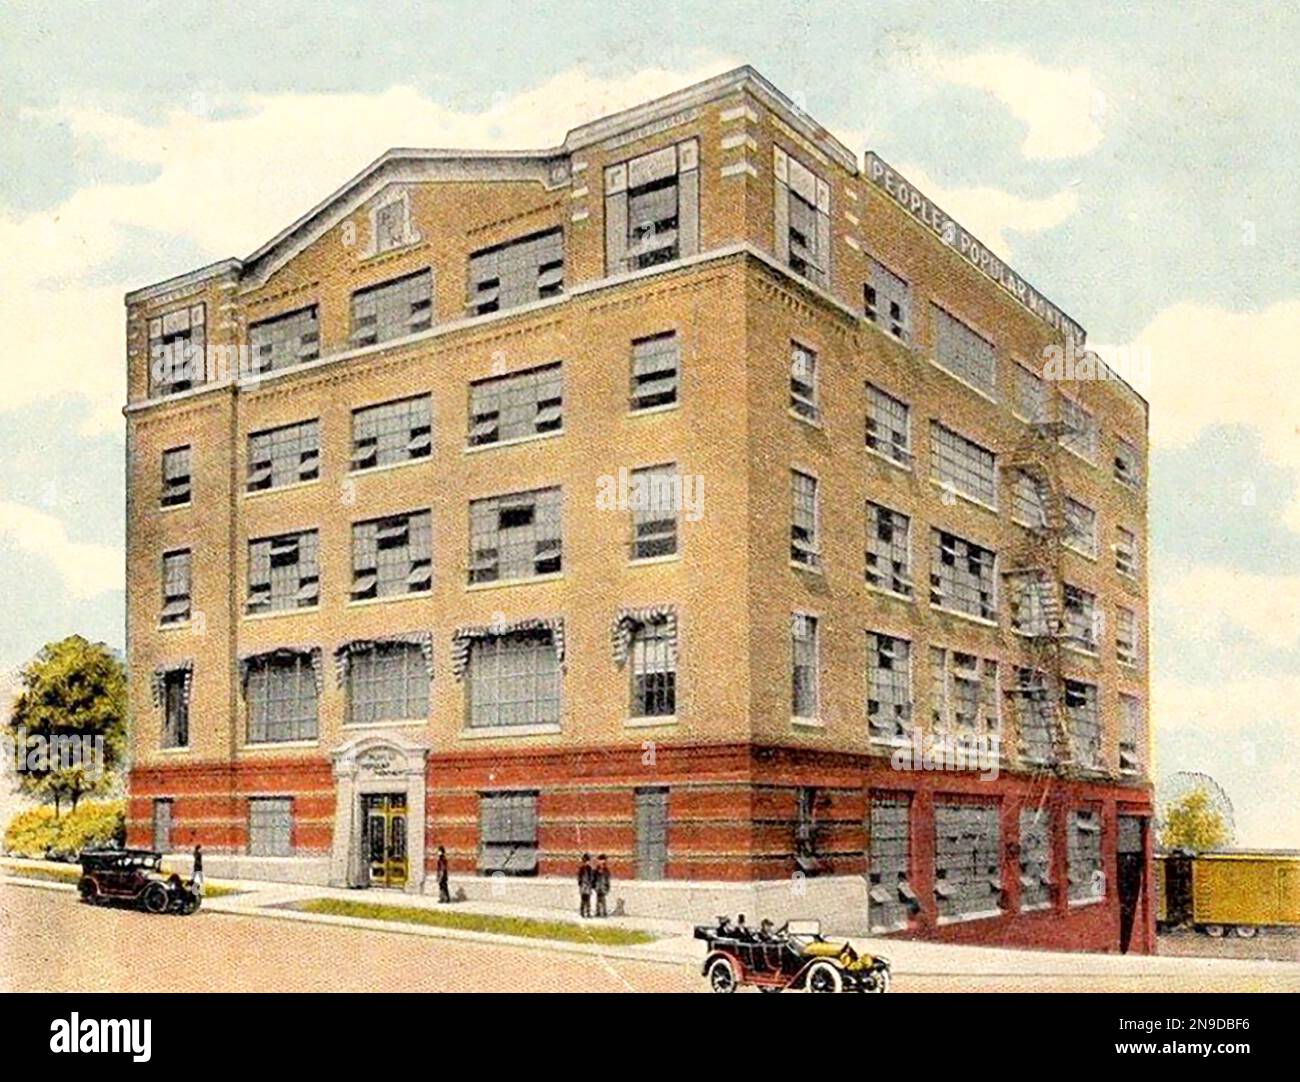 The building where 'People's Popular Monthly' magazine  was published in Des Moines, Iowa. Photo from 1920. Stock Photo